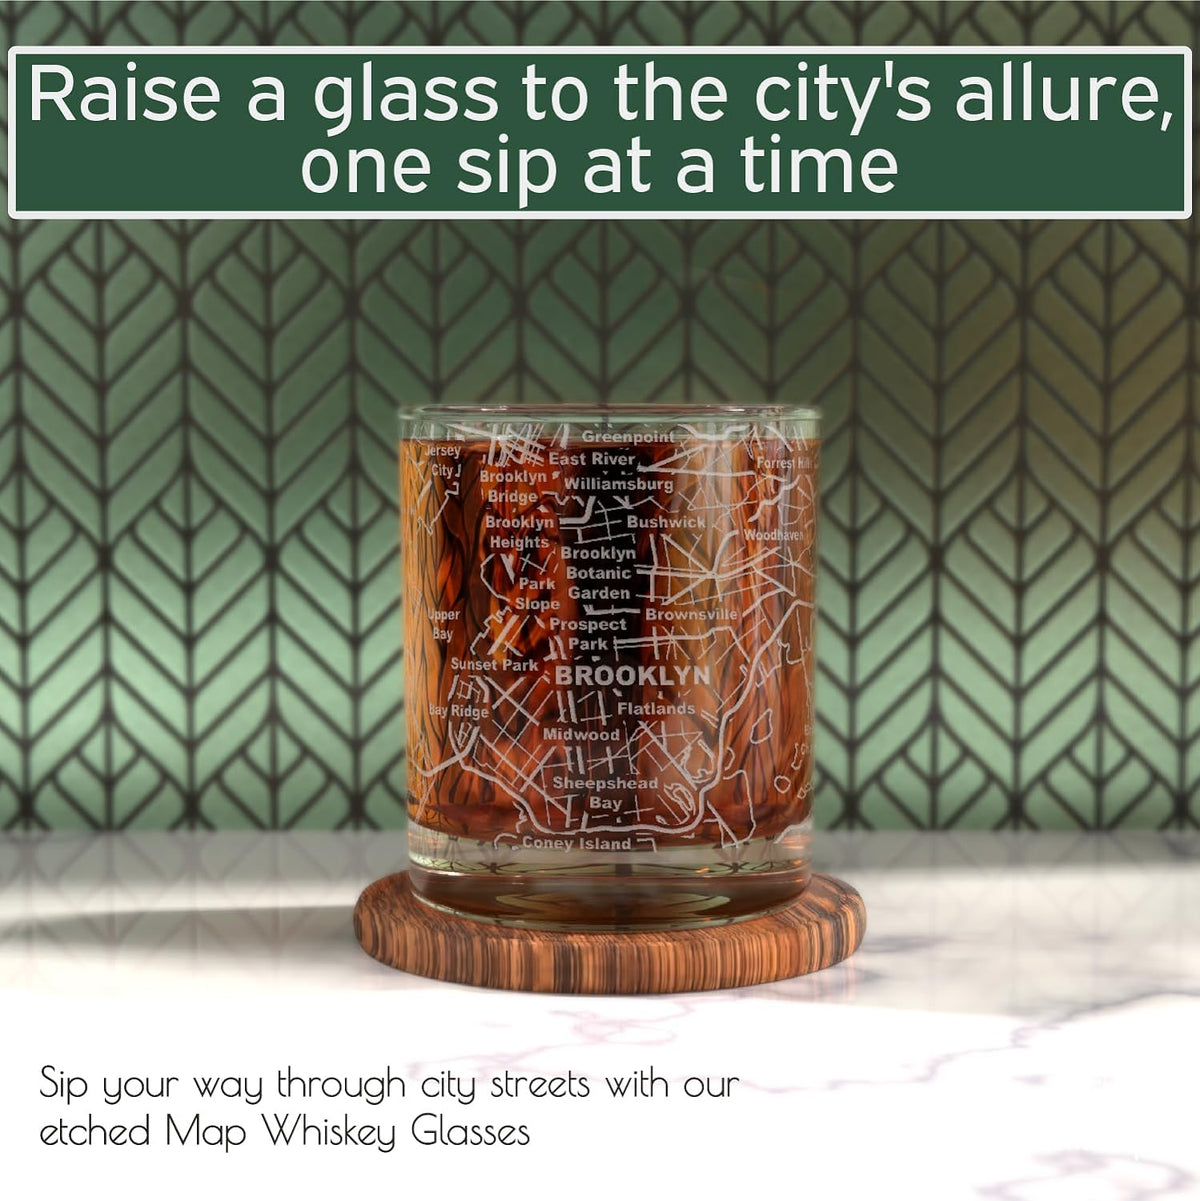 Whiskey Glasses - 10 Oz Tumbler for Brooklyn Lovers (Single Glass) - Etched with Brooklyn Map - Old Fashioned Rocks Glass